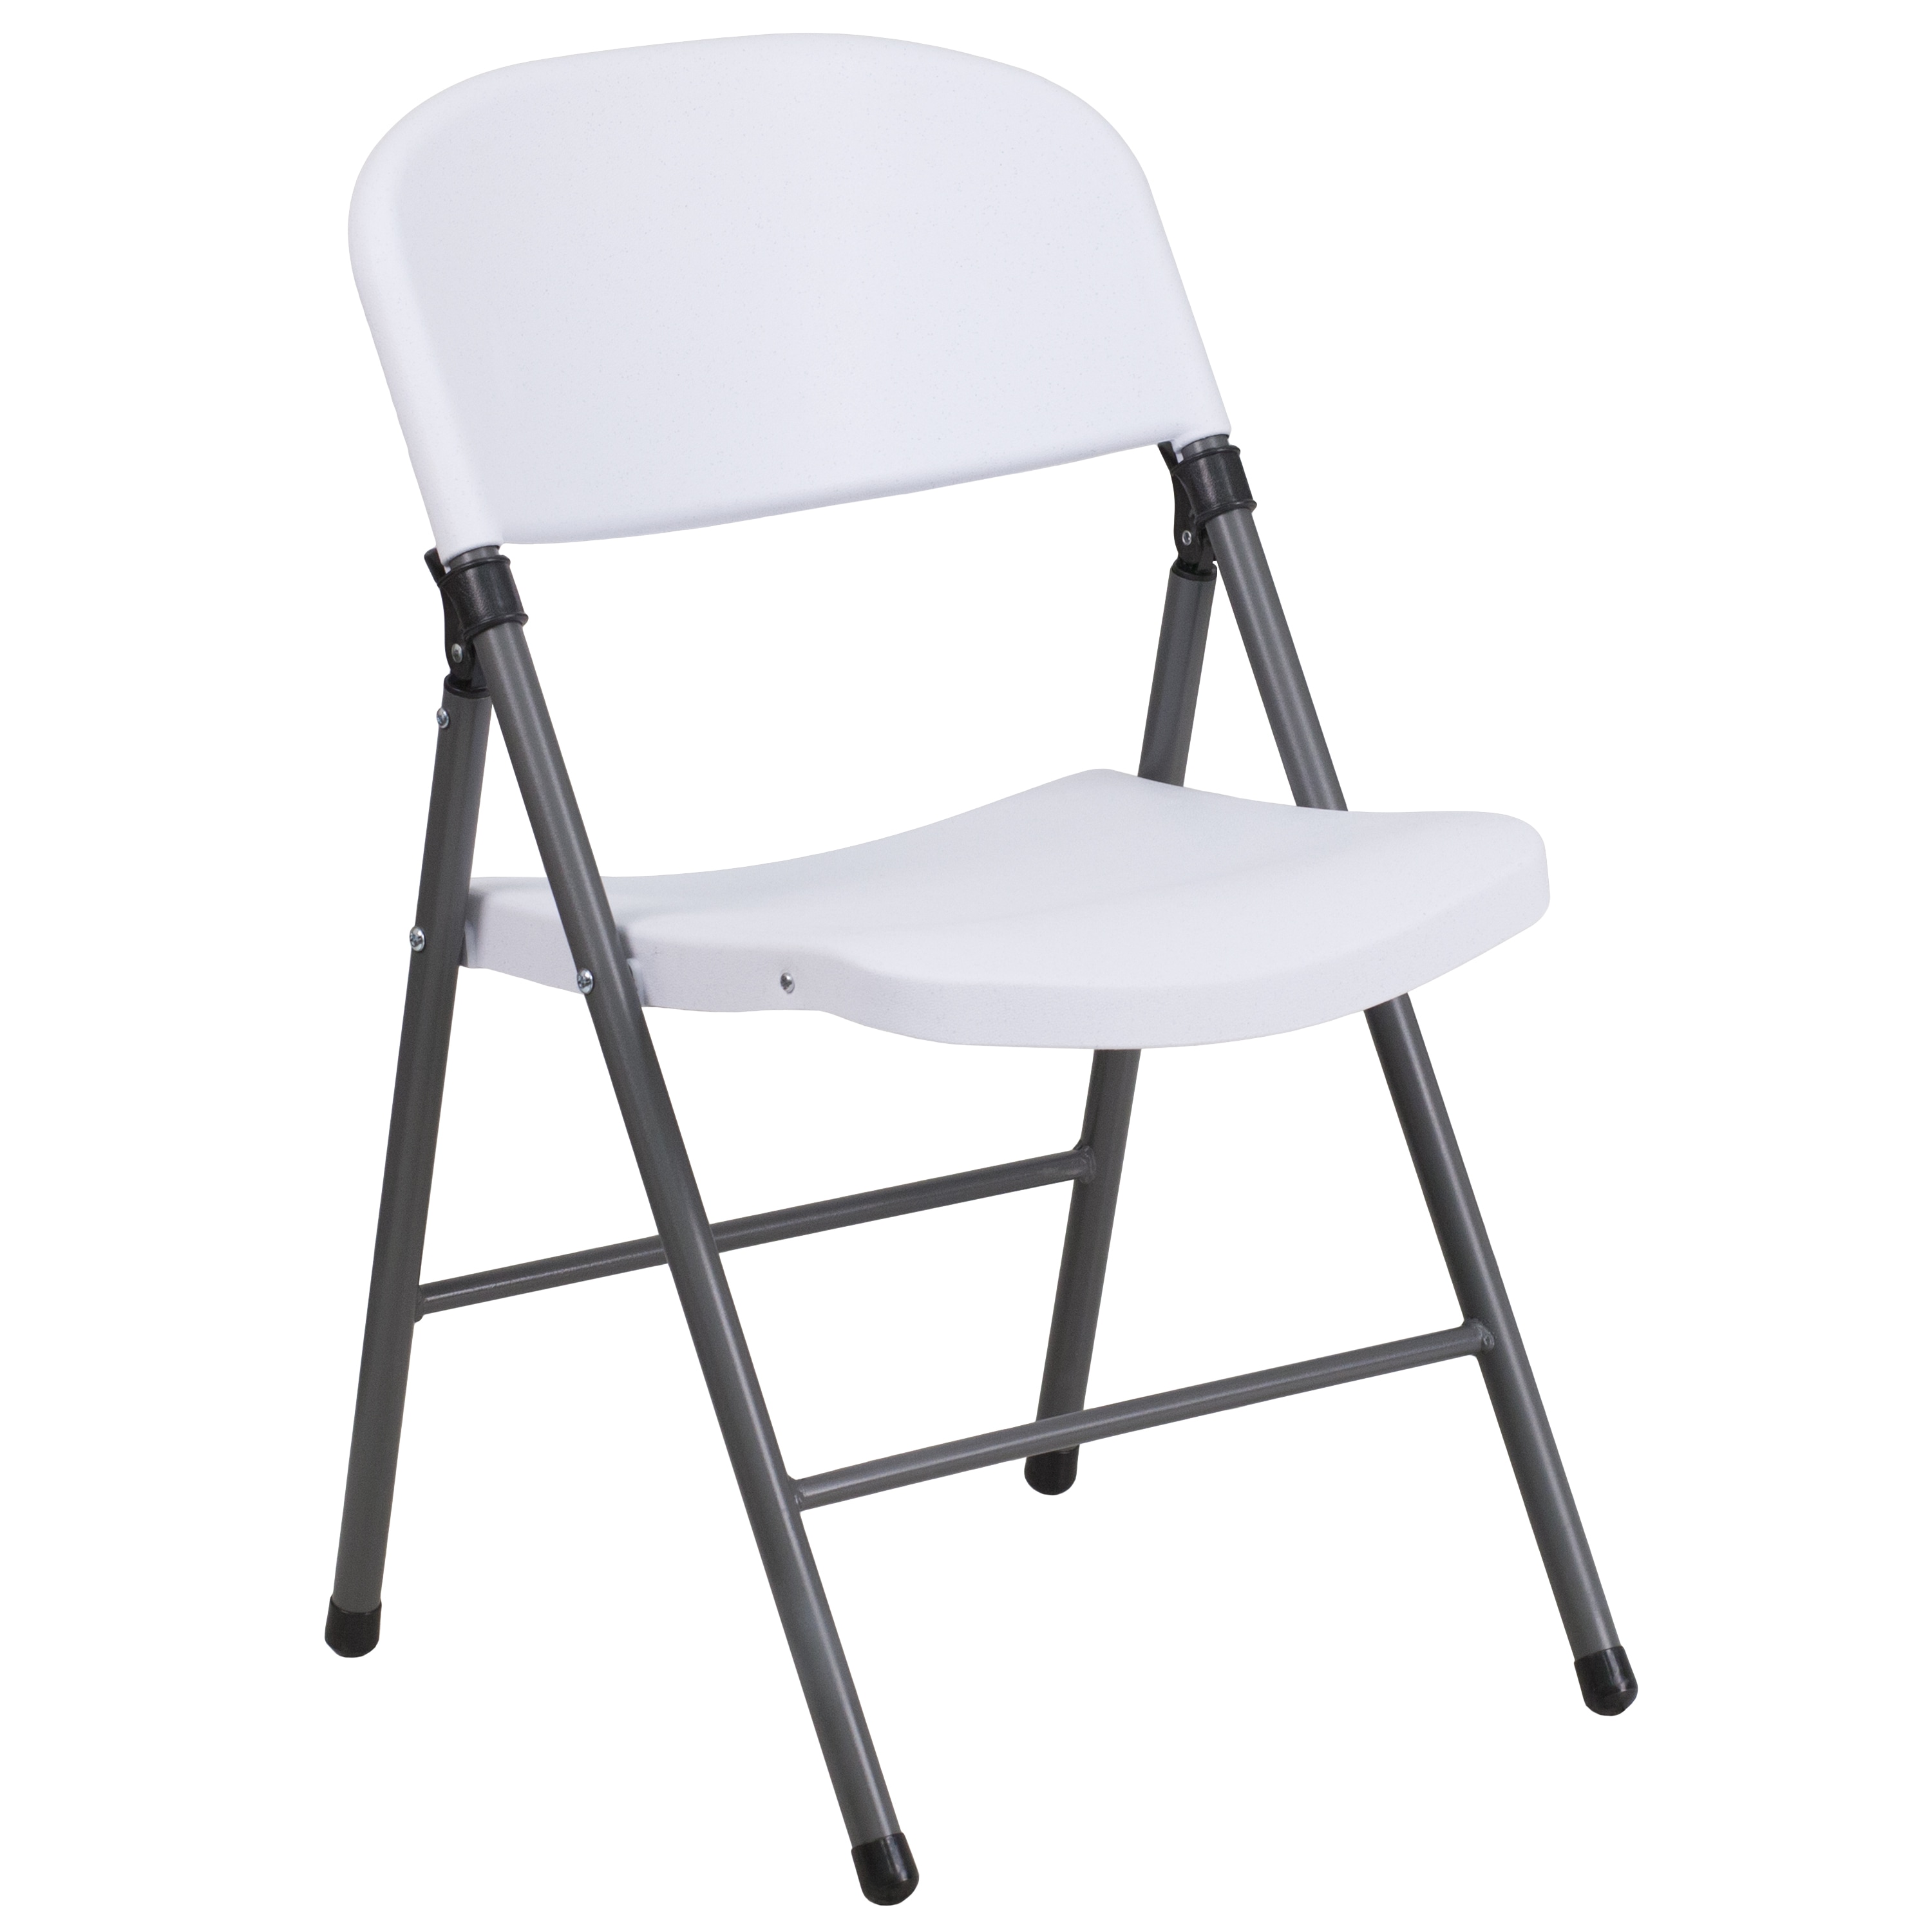 NEW Indoor Outdoor Plastic Folding Utility Chair Steel Frame LONG  LIFE 